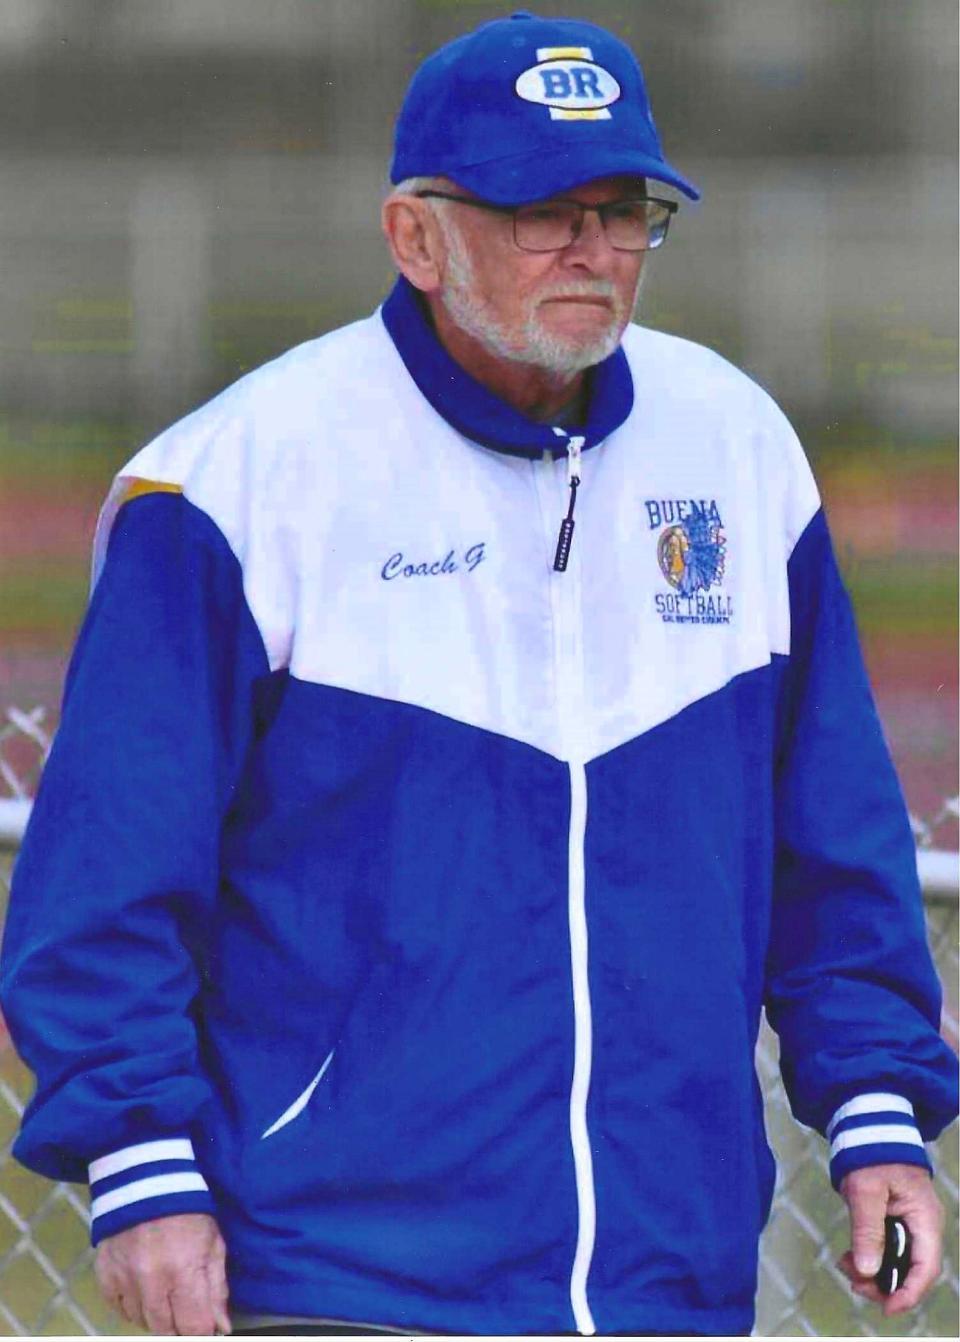 Frank Geremia will be inducted into the Buena Regional Athletic Hall of Fame on Nov. 26